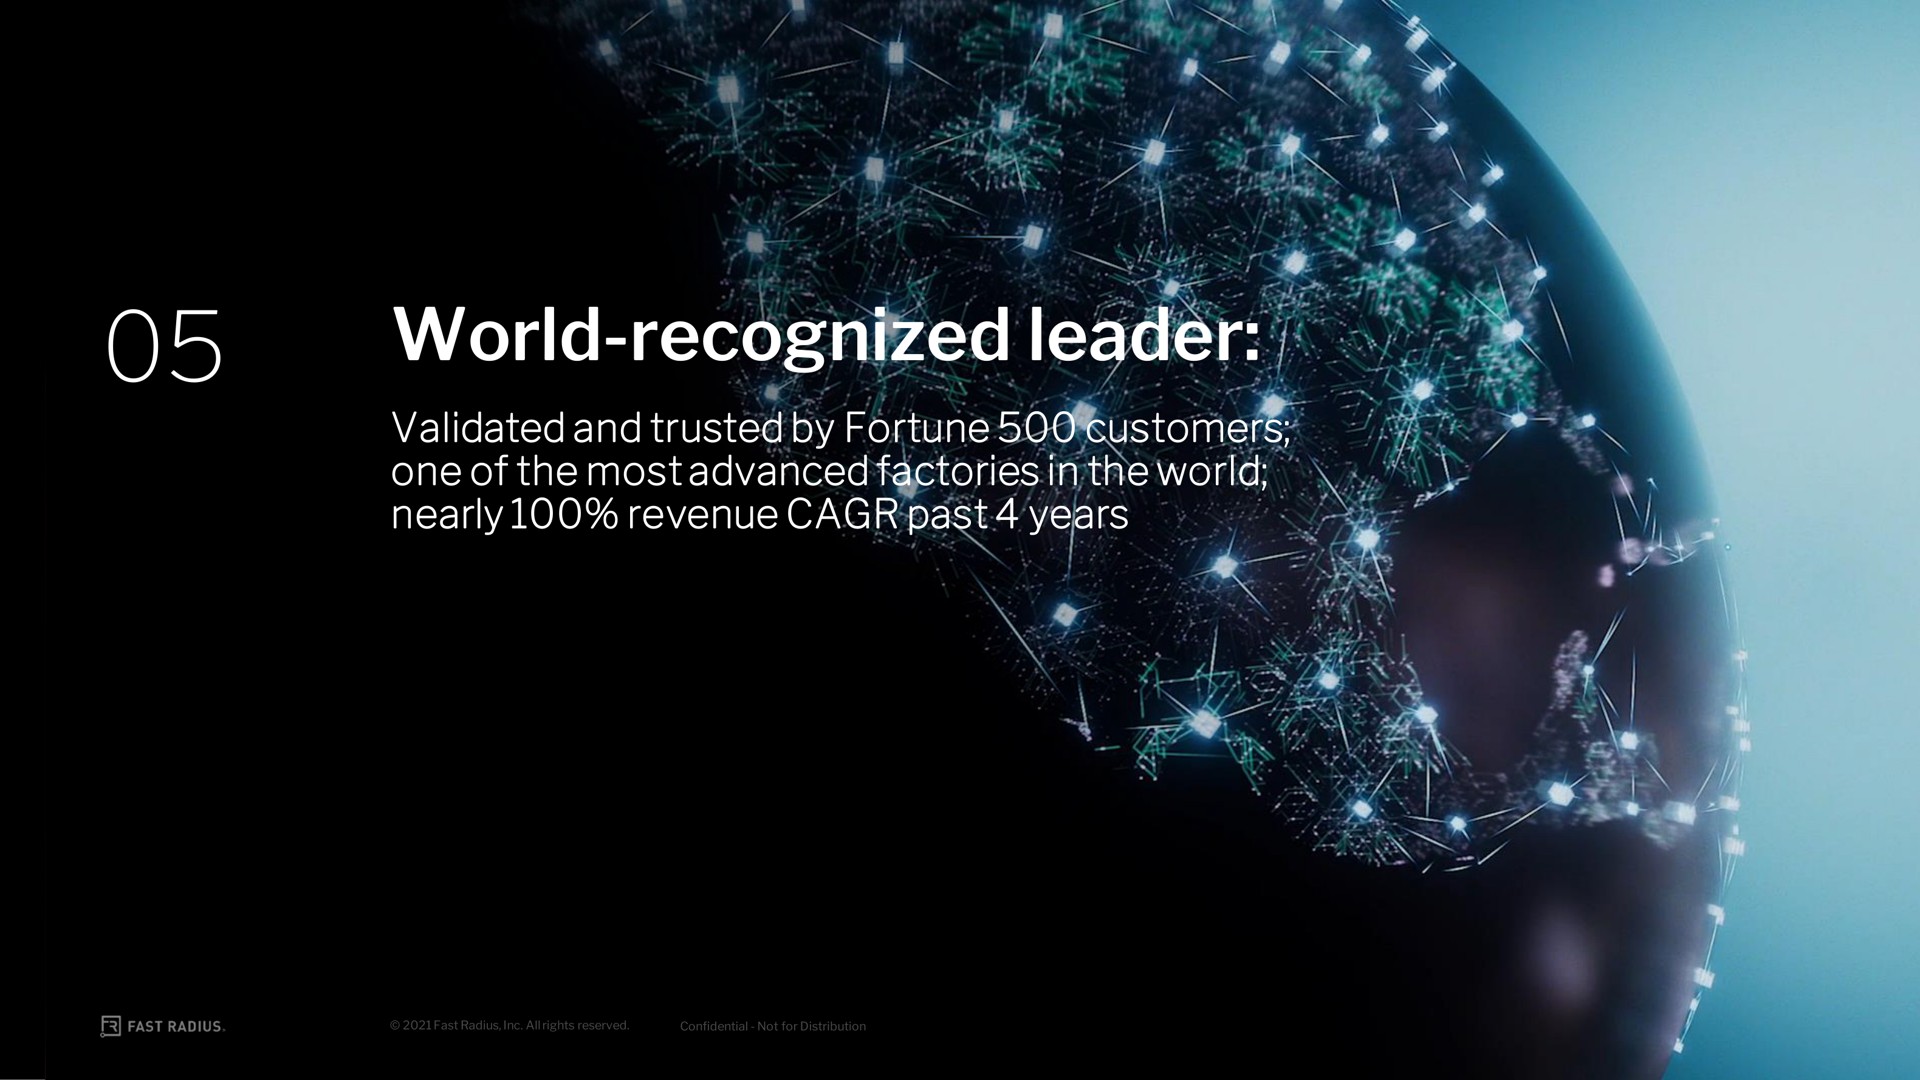 world recognized leader validated and trusted by fortune customers one of the most advanced factories in the world nearly revenue past years cag | Fast Radius